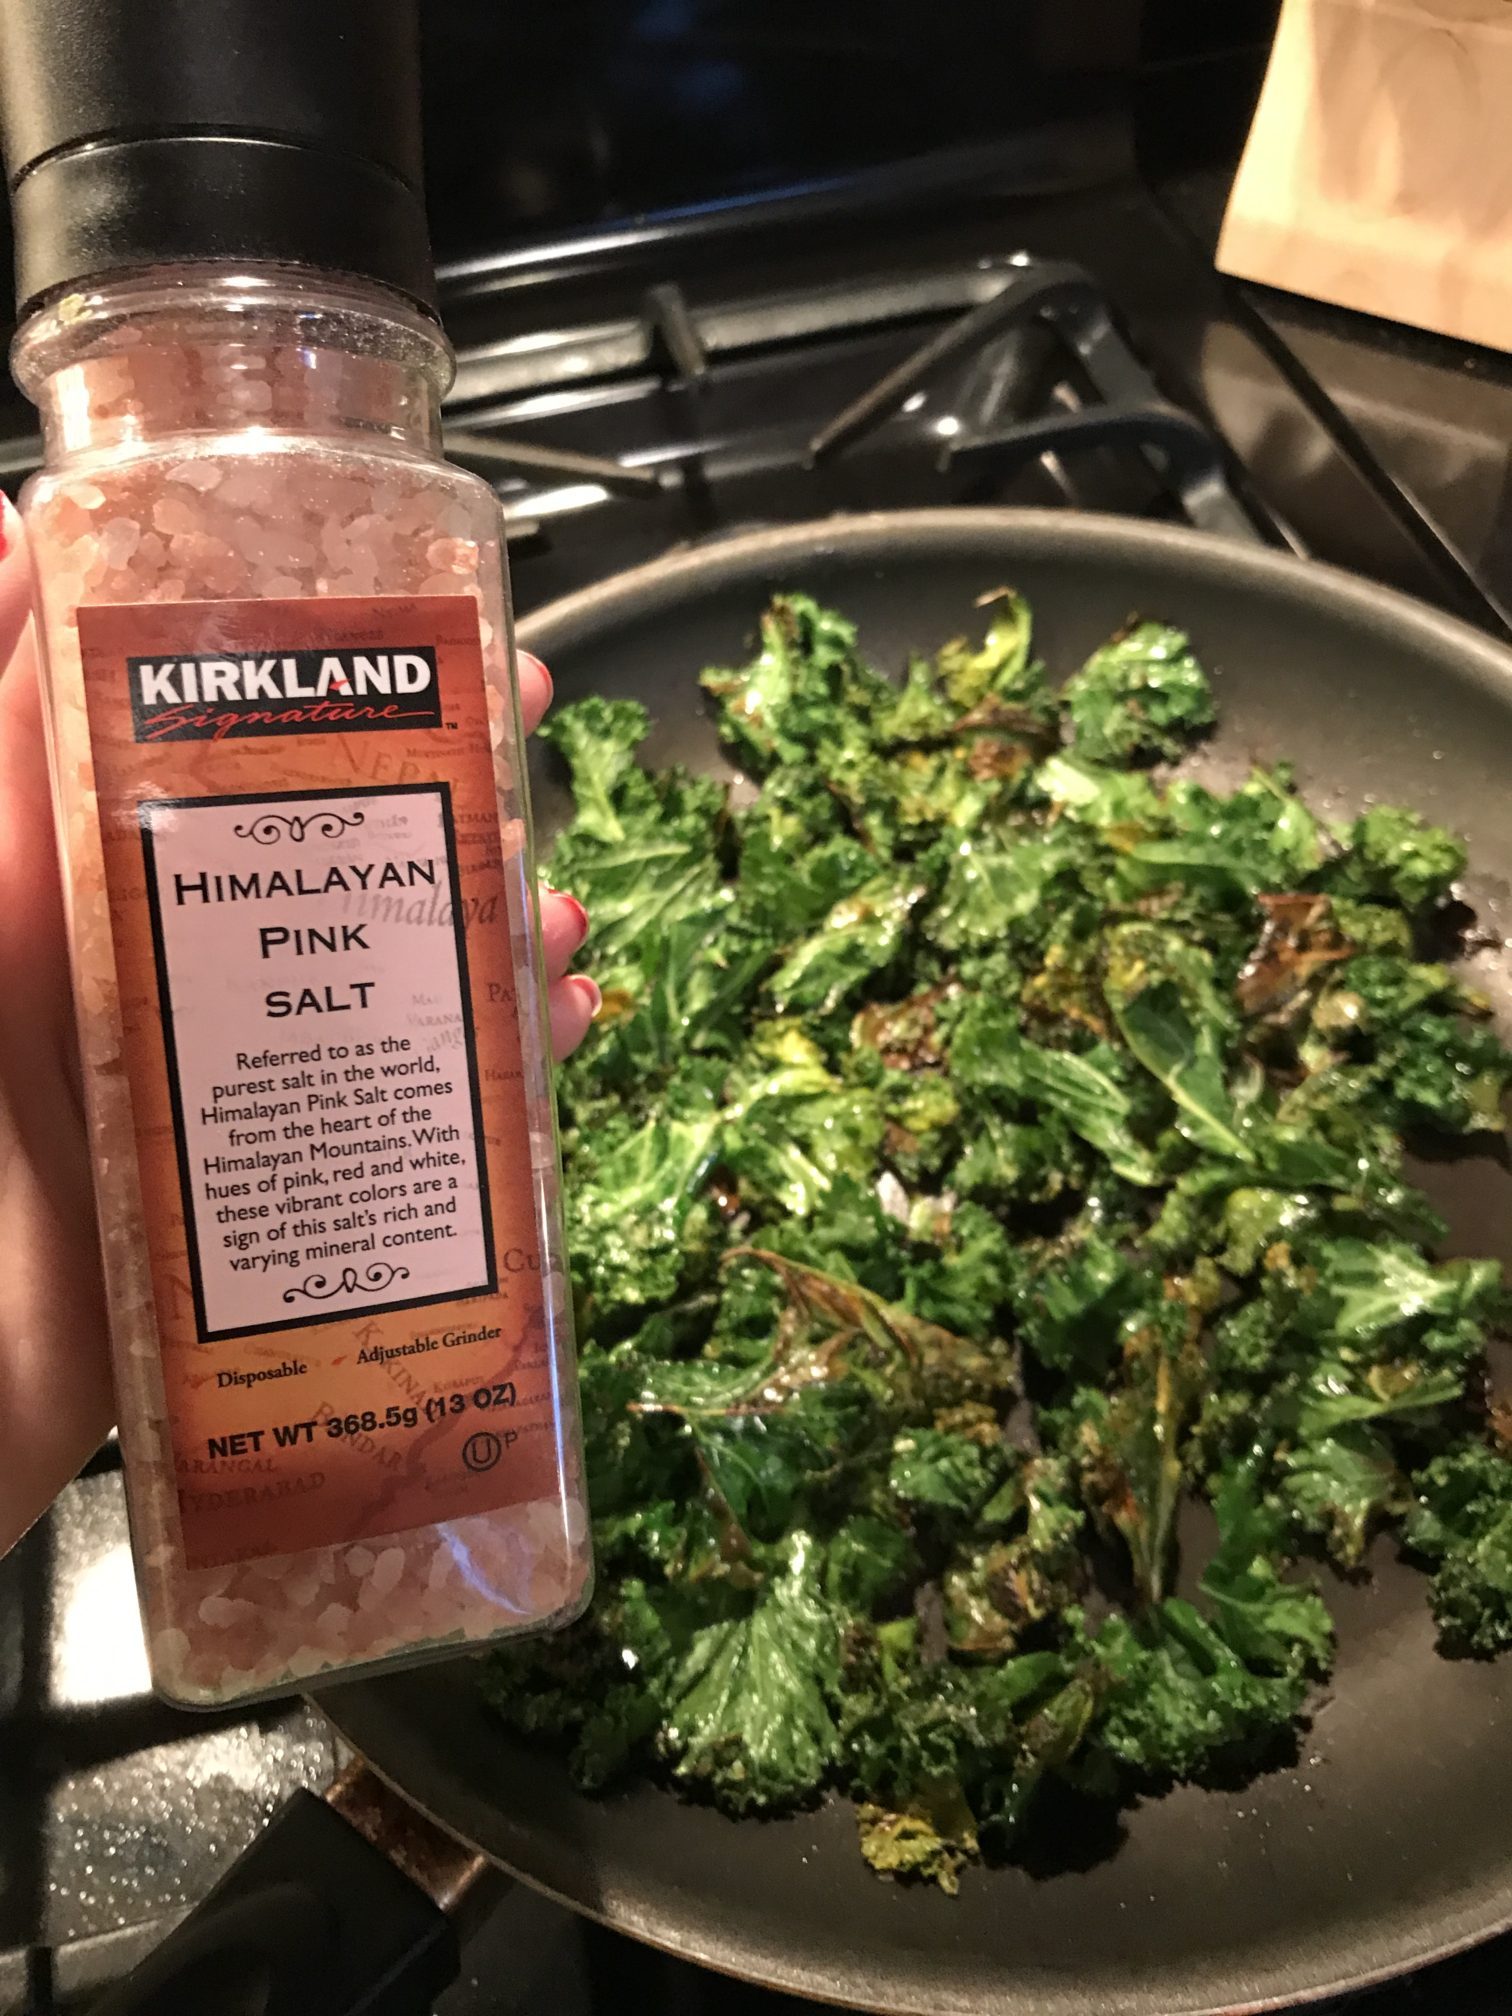 Simple Kale Chips Recipe